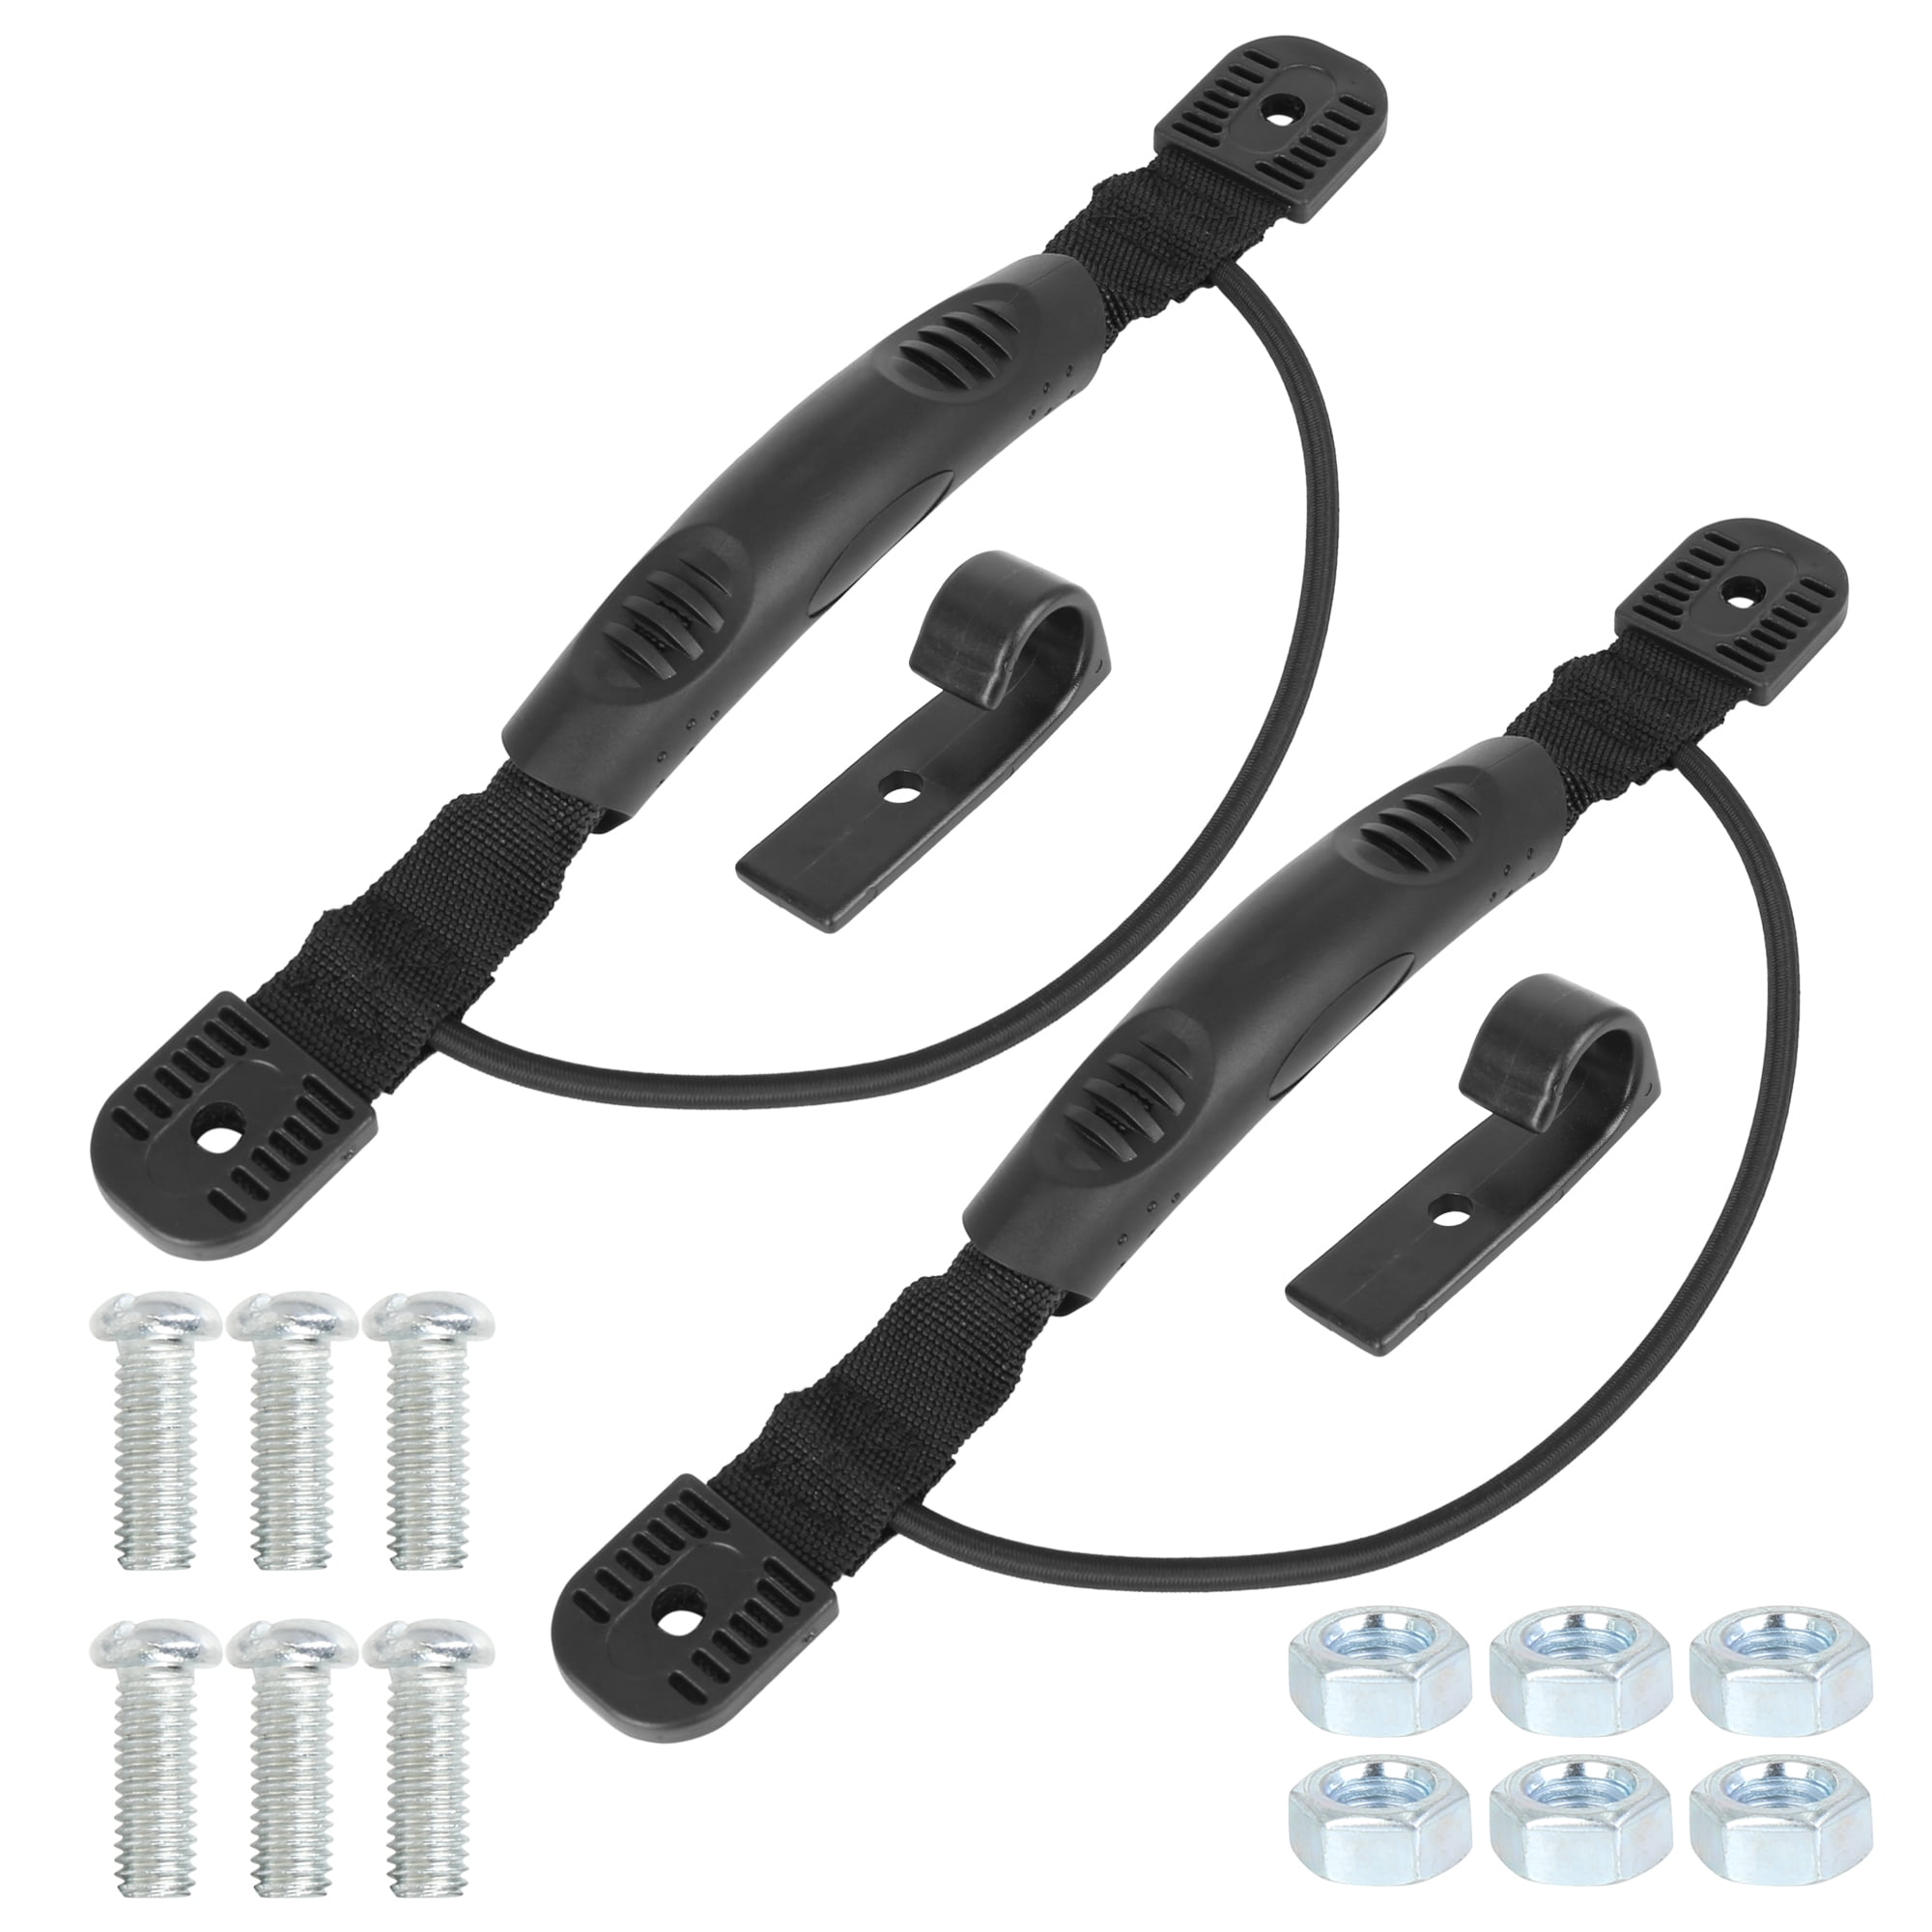 1-4pcs Kayak Canoe Side Mount Handle With Bungee Cord Screws Cap Cover Accessory 